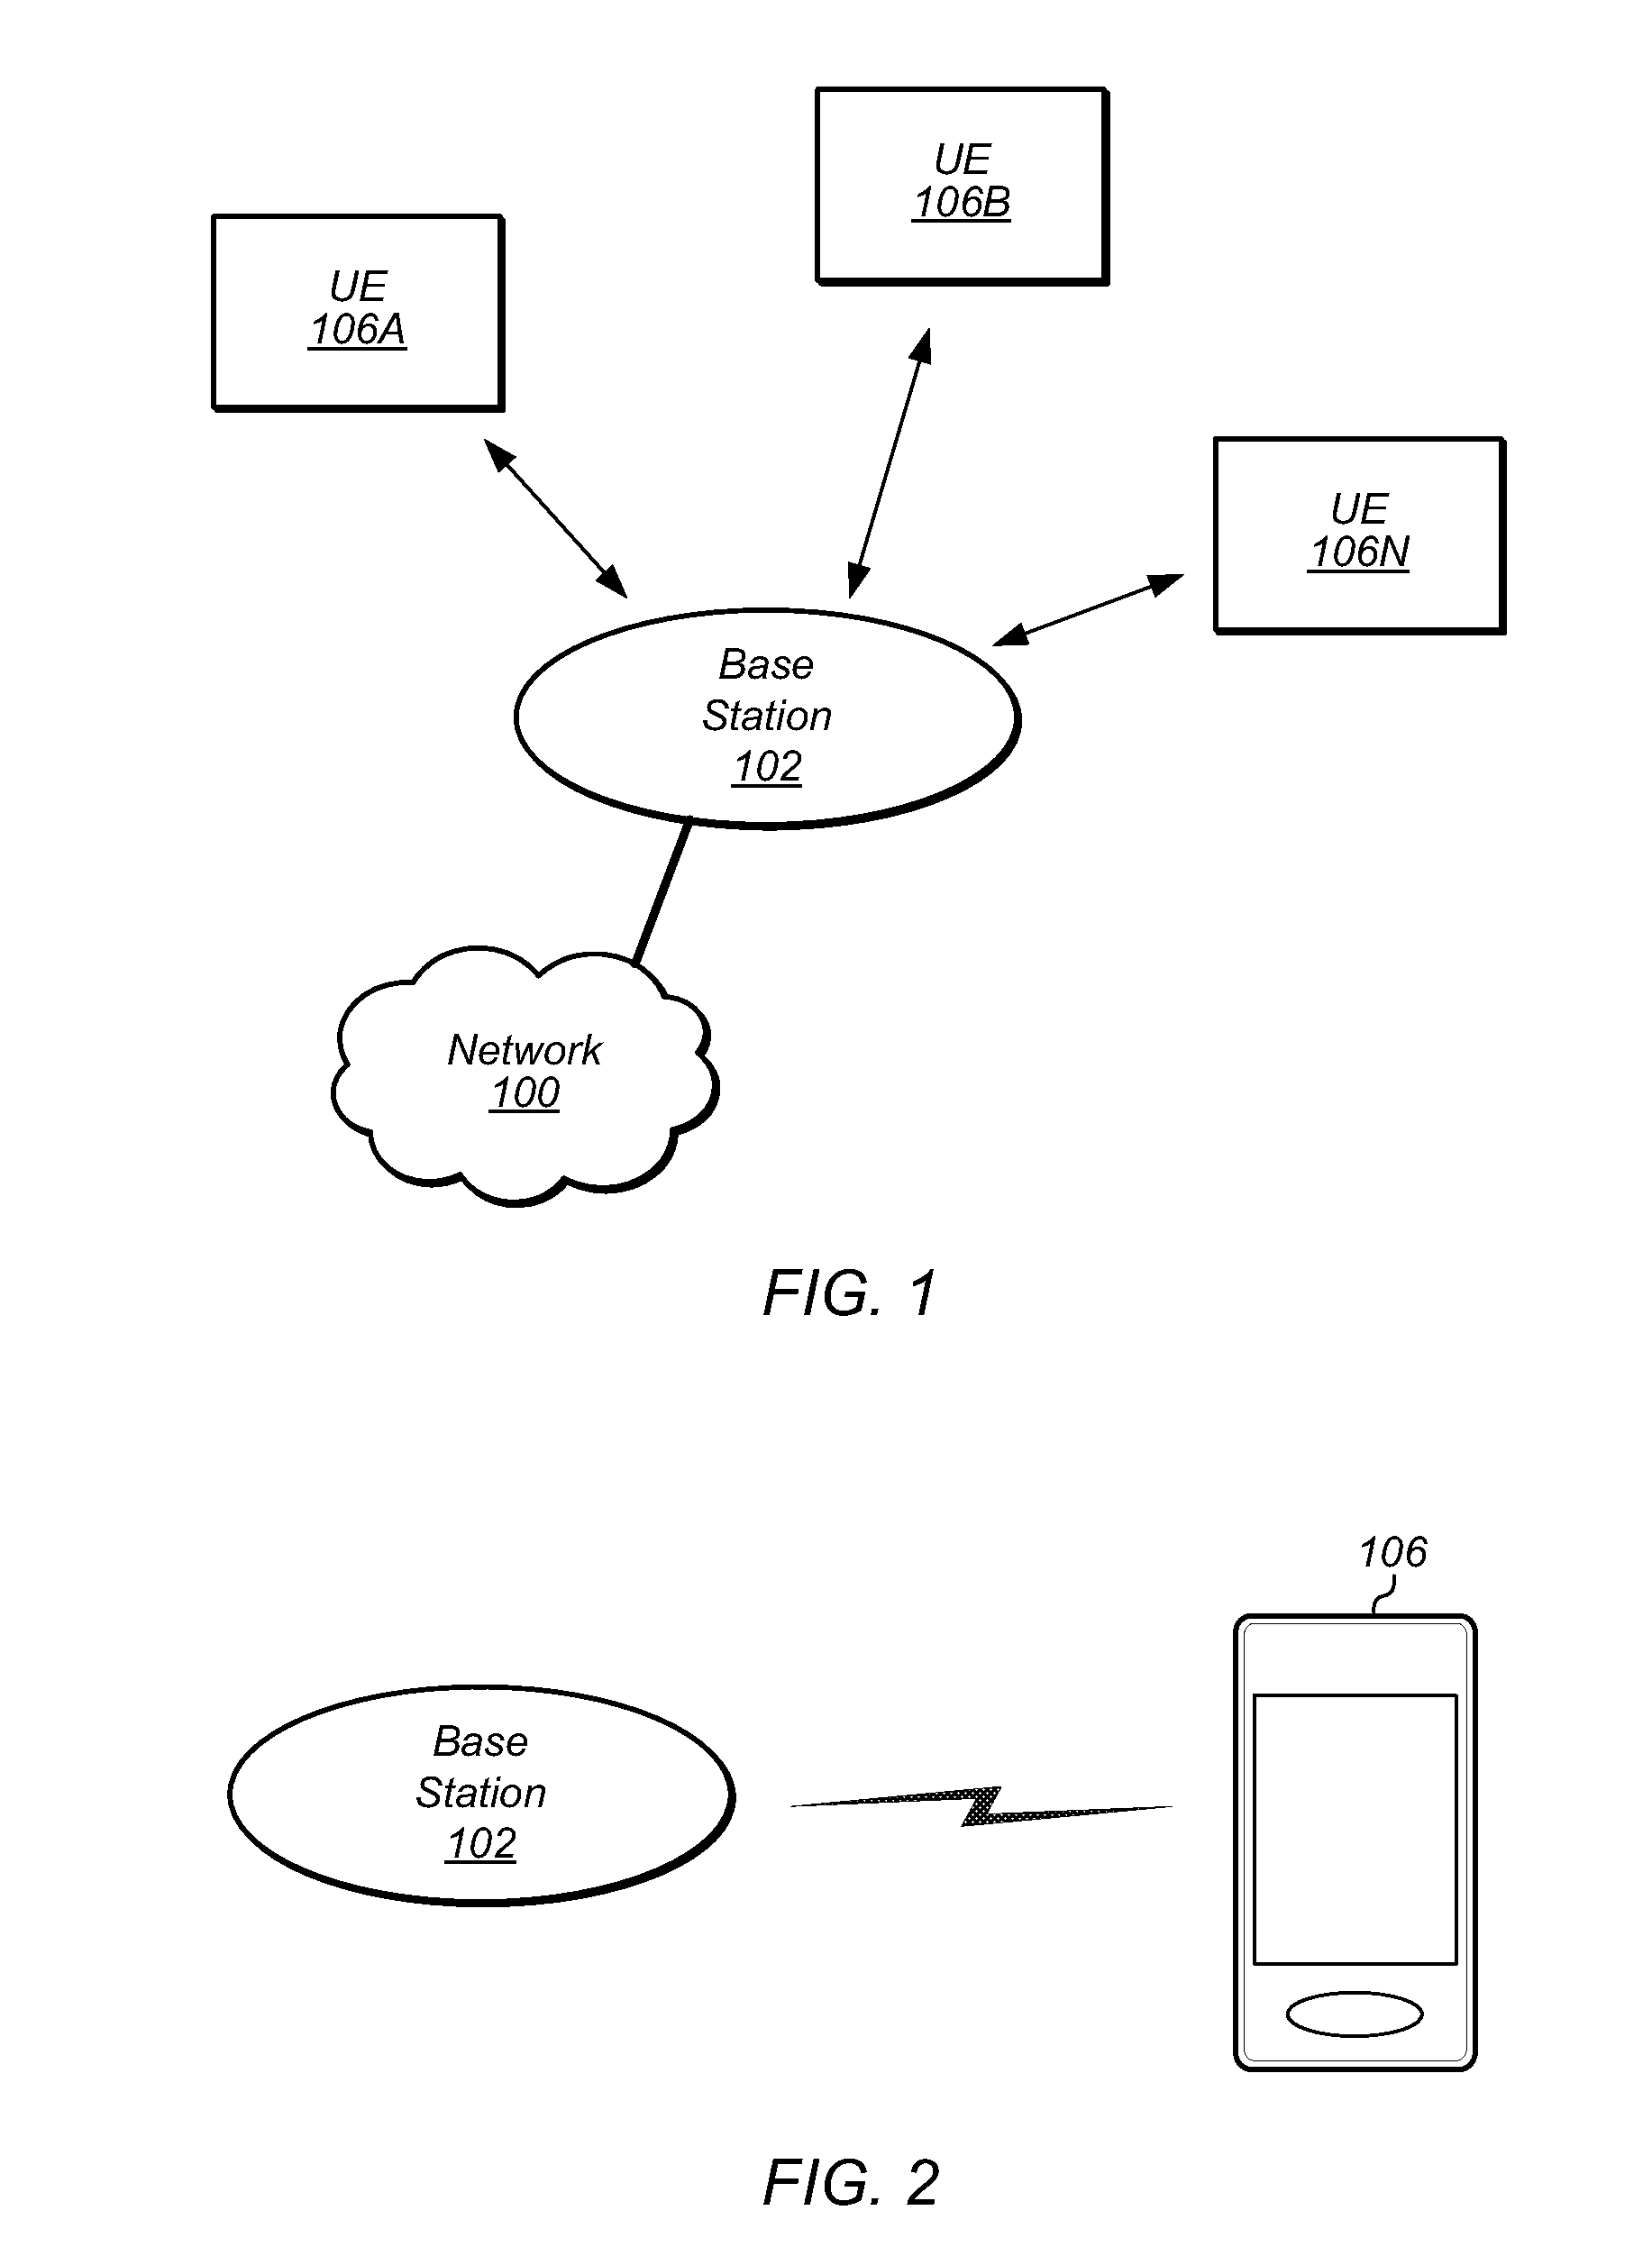 Synchronizing Uplink and Downlink Transmissions in a Wireless Device